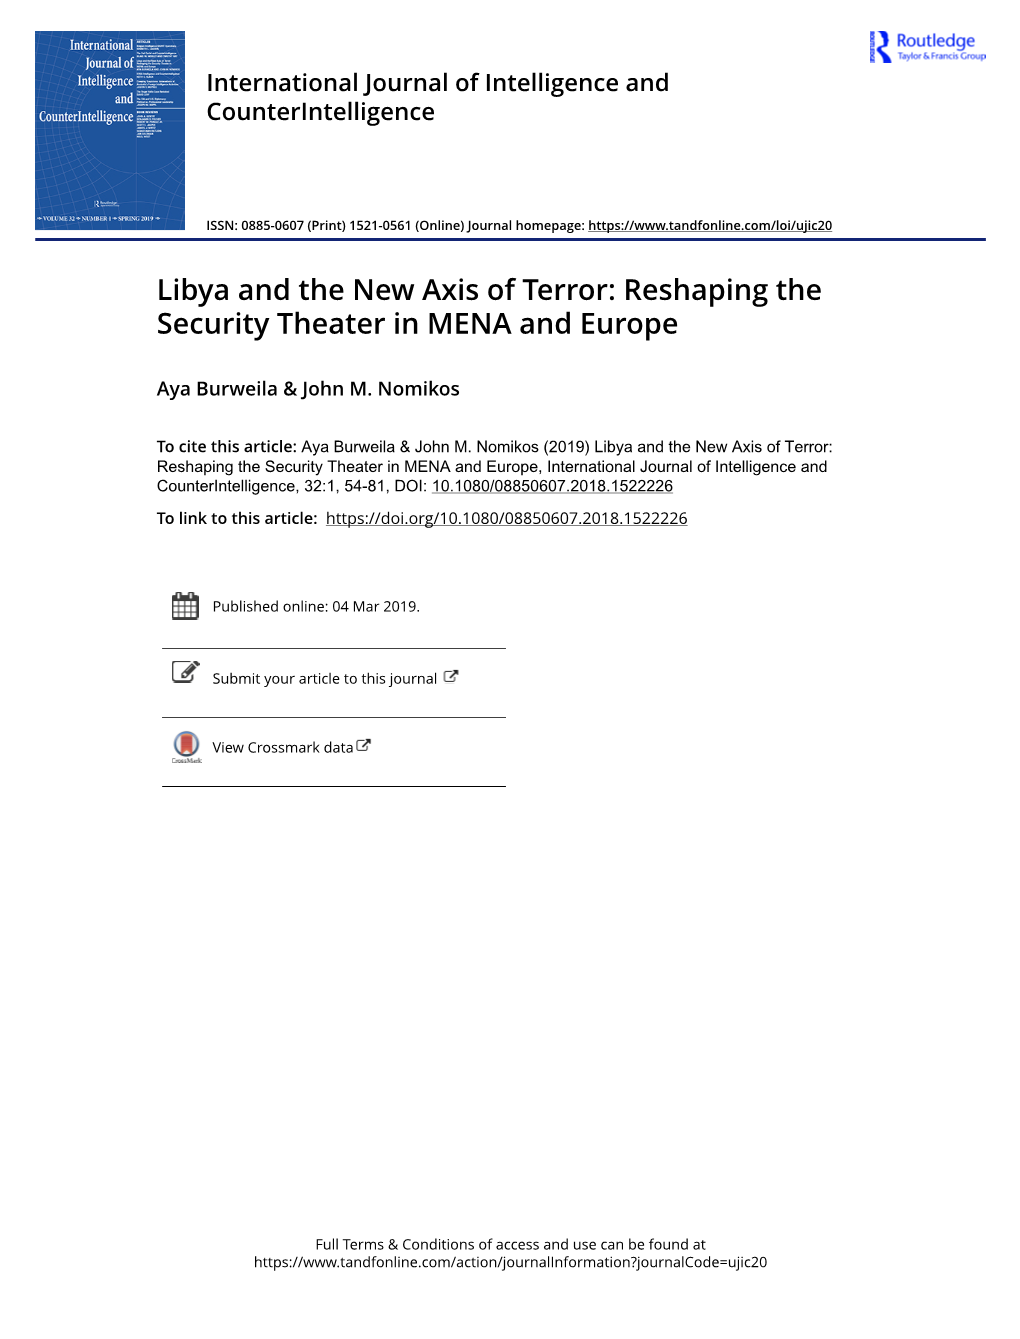 Libya and the New Axis of Terror: Reshaping the Security Theater in MENA and Europe